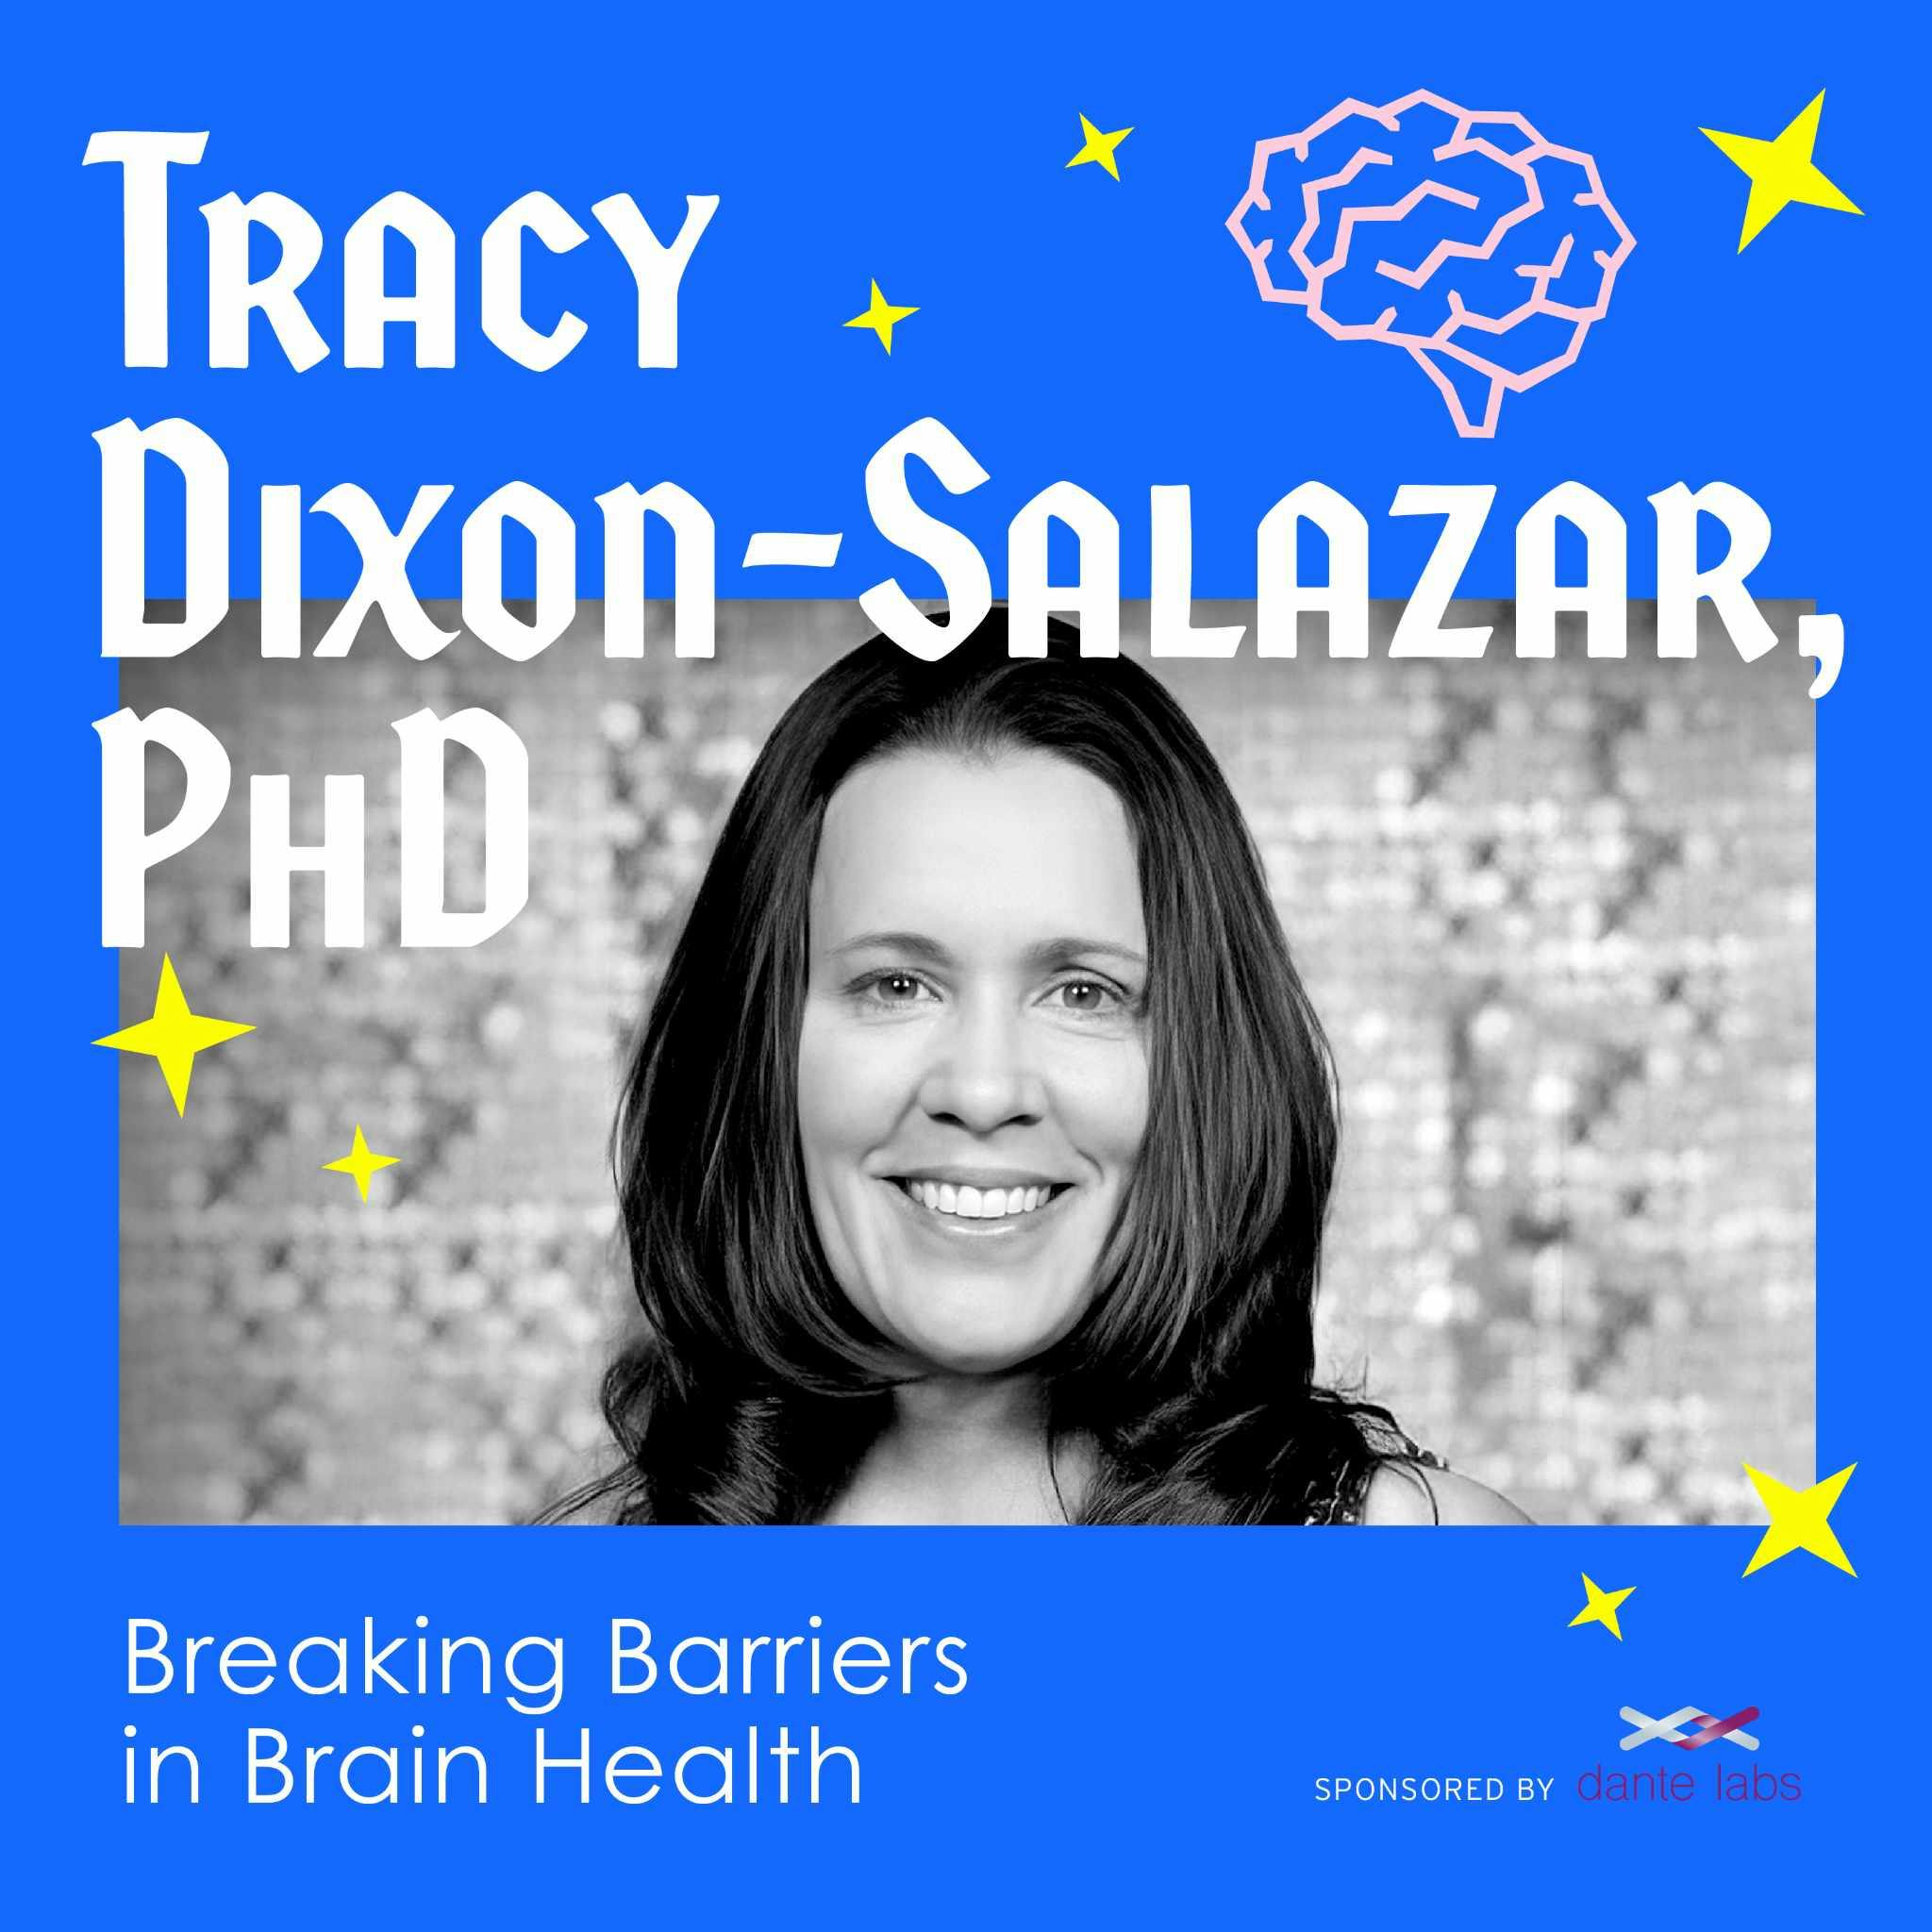 Breaking Barriers in Brain Health with Tracy Dixon-Salazar, PhD